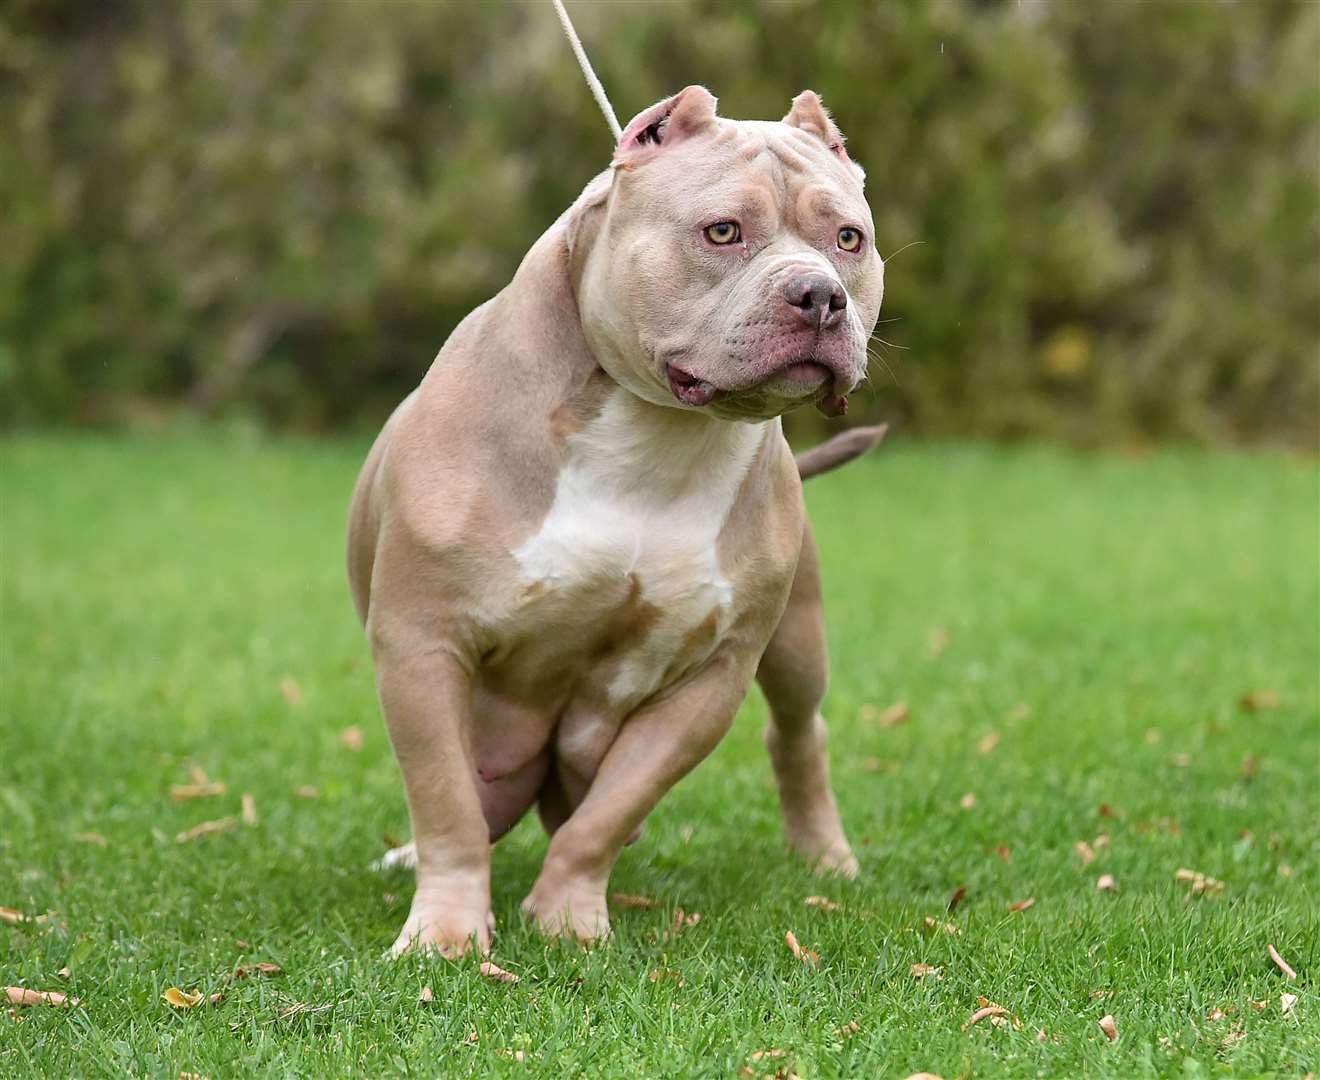 An American Bully dog. Picture: iStock / alberto clemares exposito